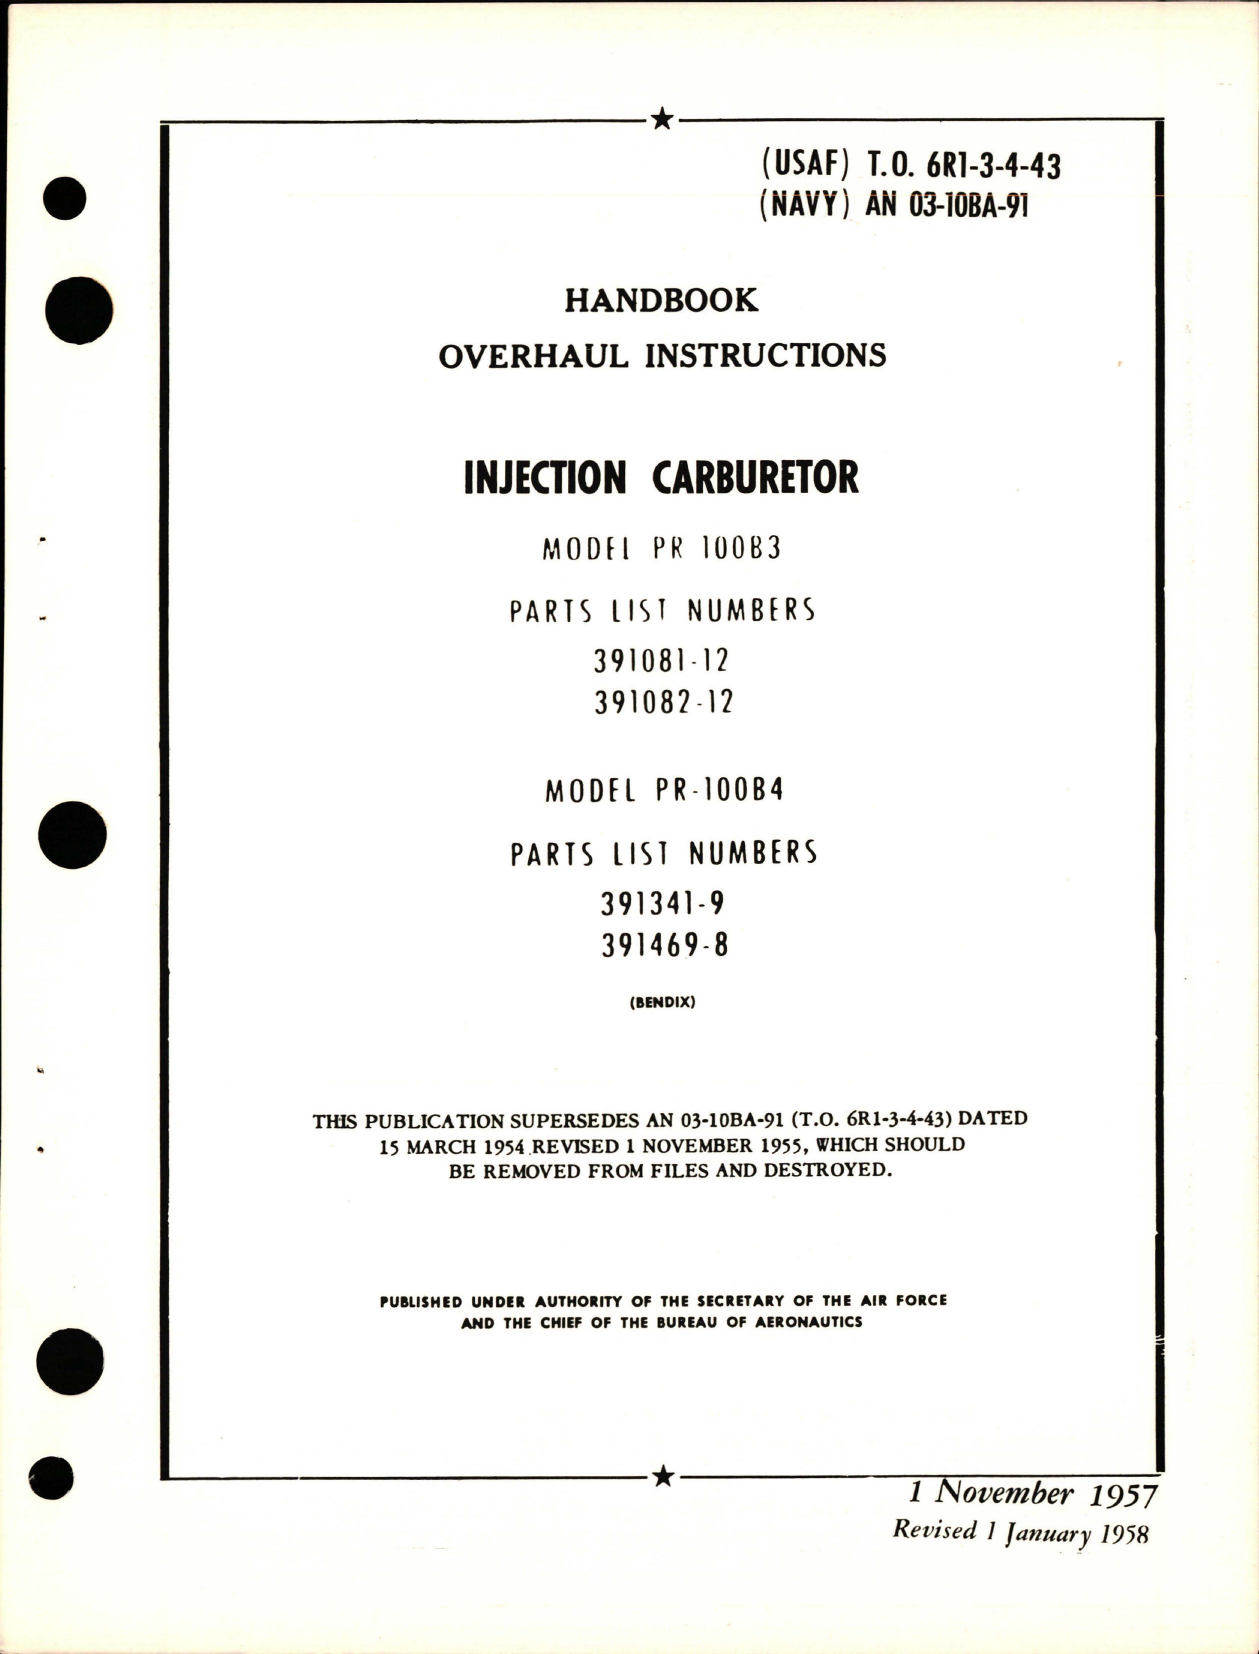 Sample page 1 from AirCorps Library document: Overhaul Instructions for Injection Carburetor - Model PR-100B3, PR-100B4  - Parts List 391081-12, 391082-12, 391341-9, and 391469-8